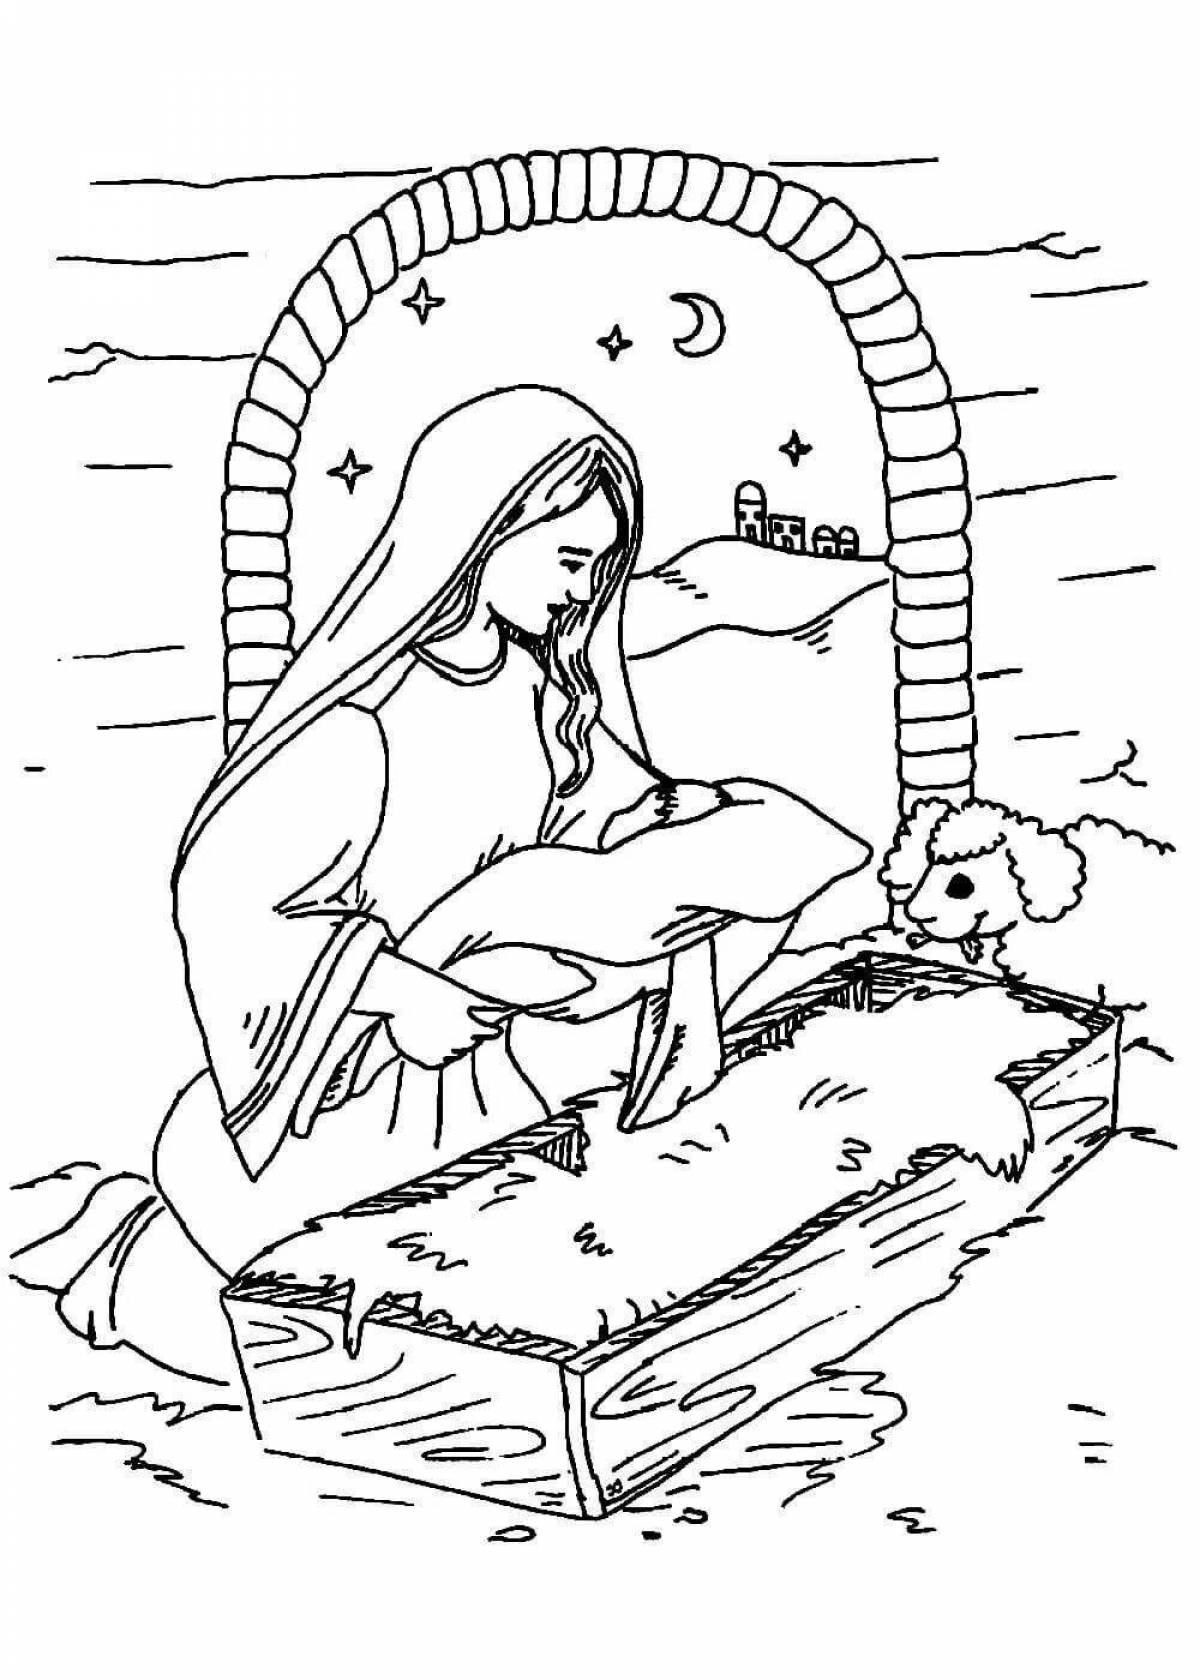 Birth of christ inspiration coloring page